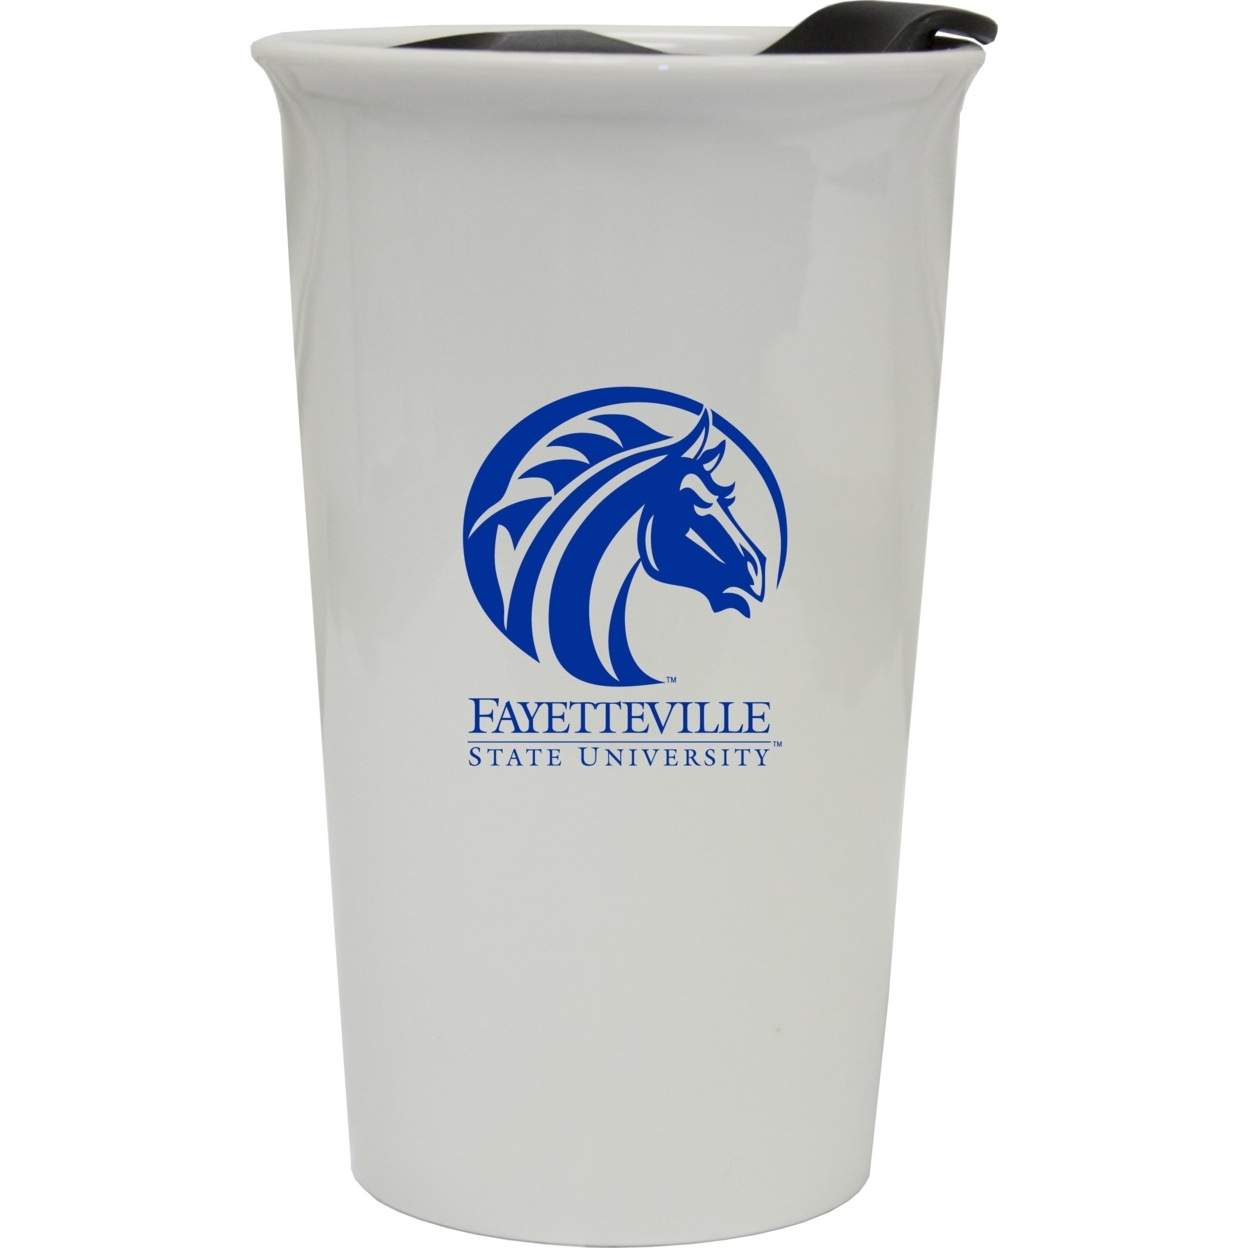 Fayetteville State University Double Walled Ceramic Tumbler